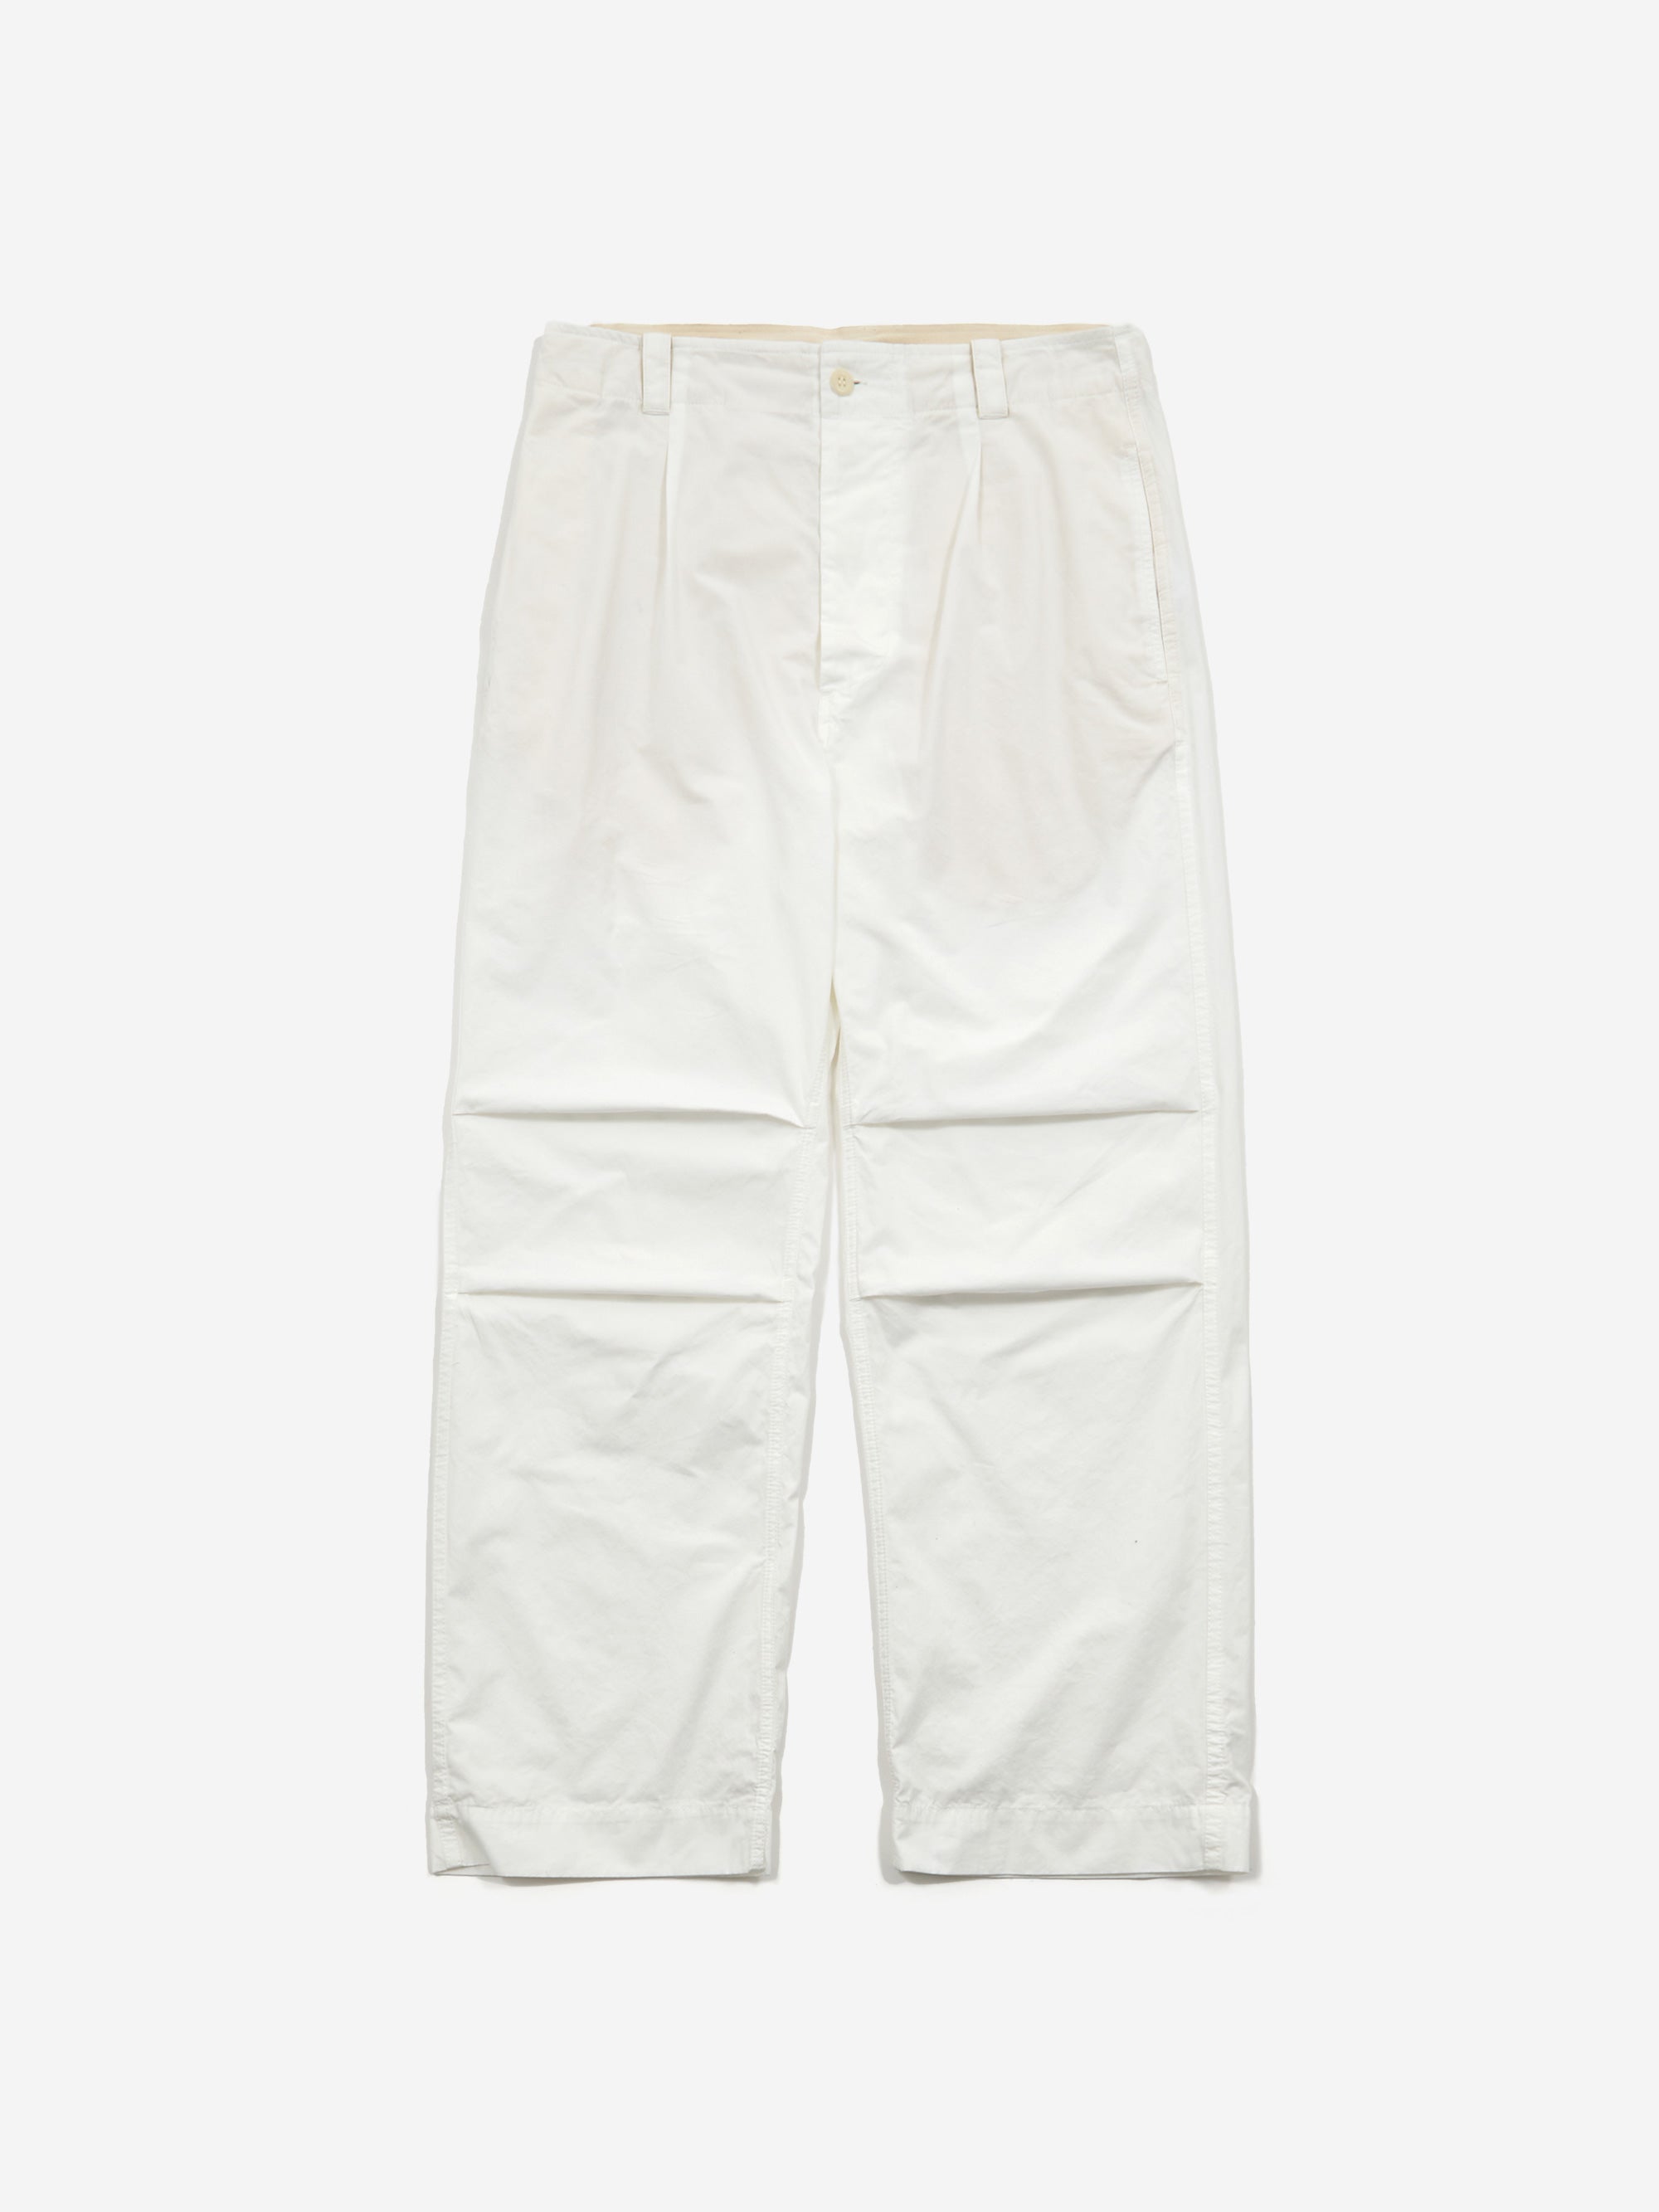 Off-White Parachute Trousers by MHL by Margaret Howell on Sale